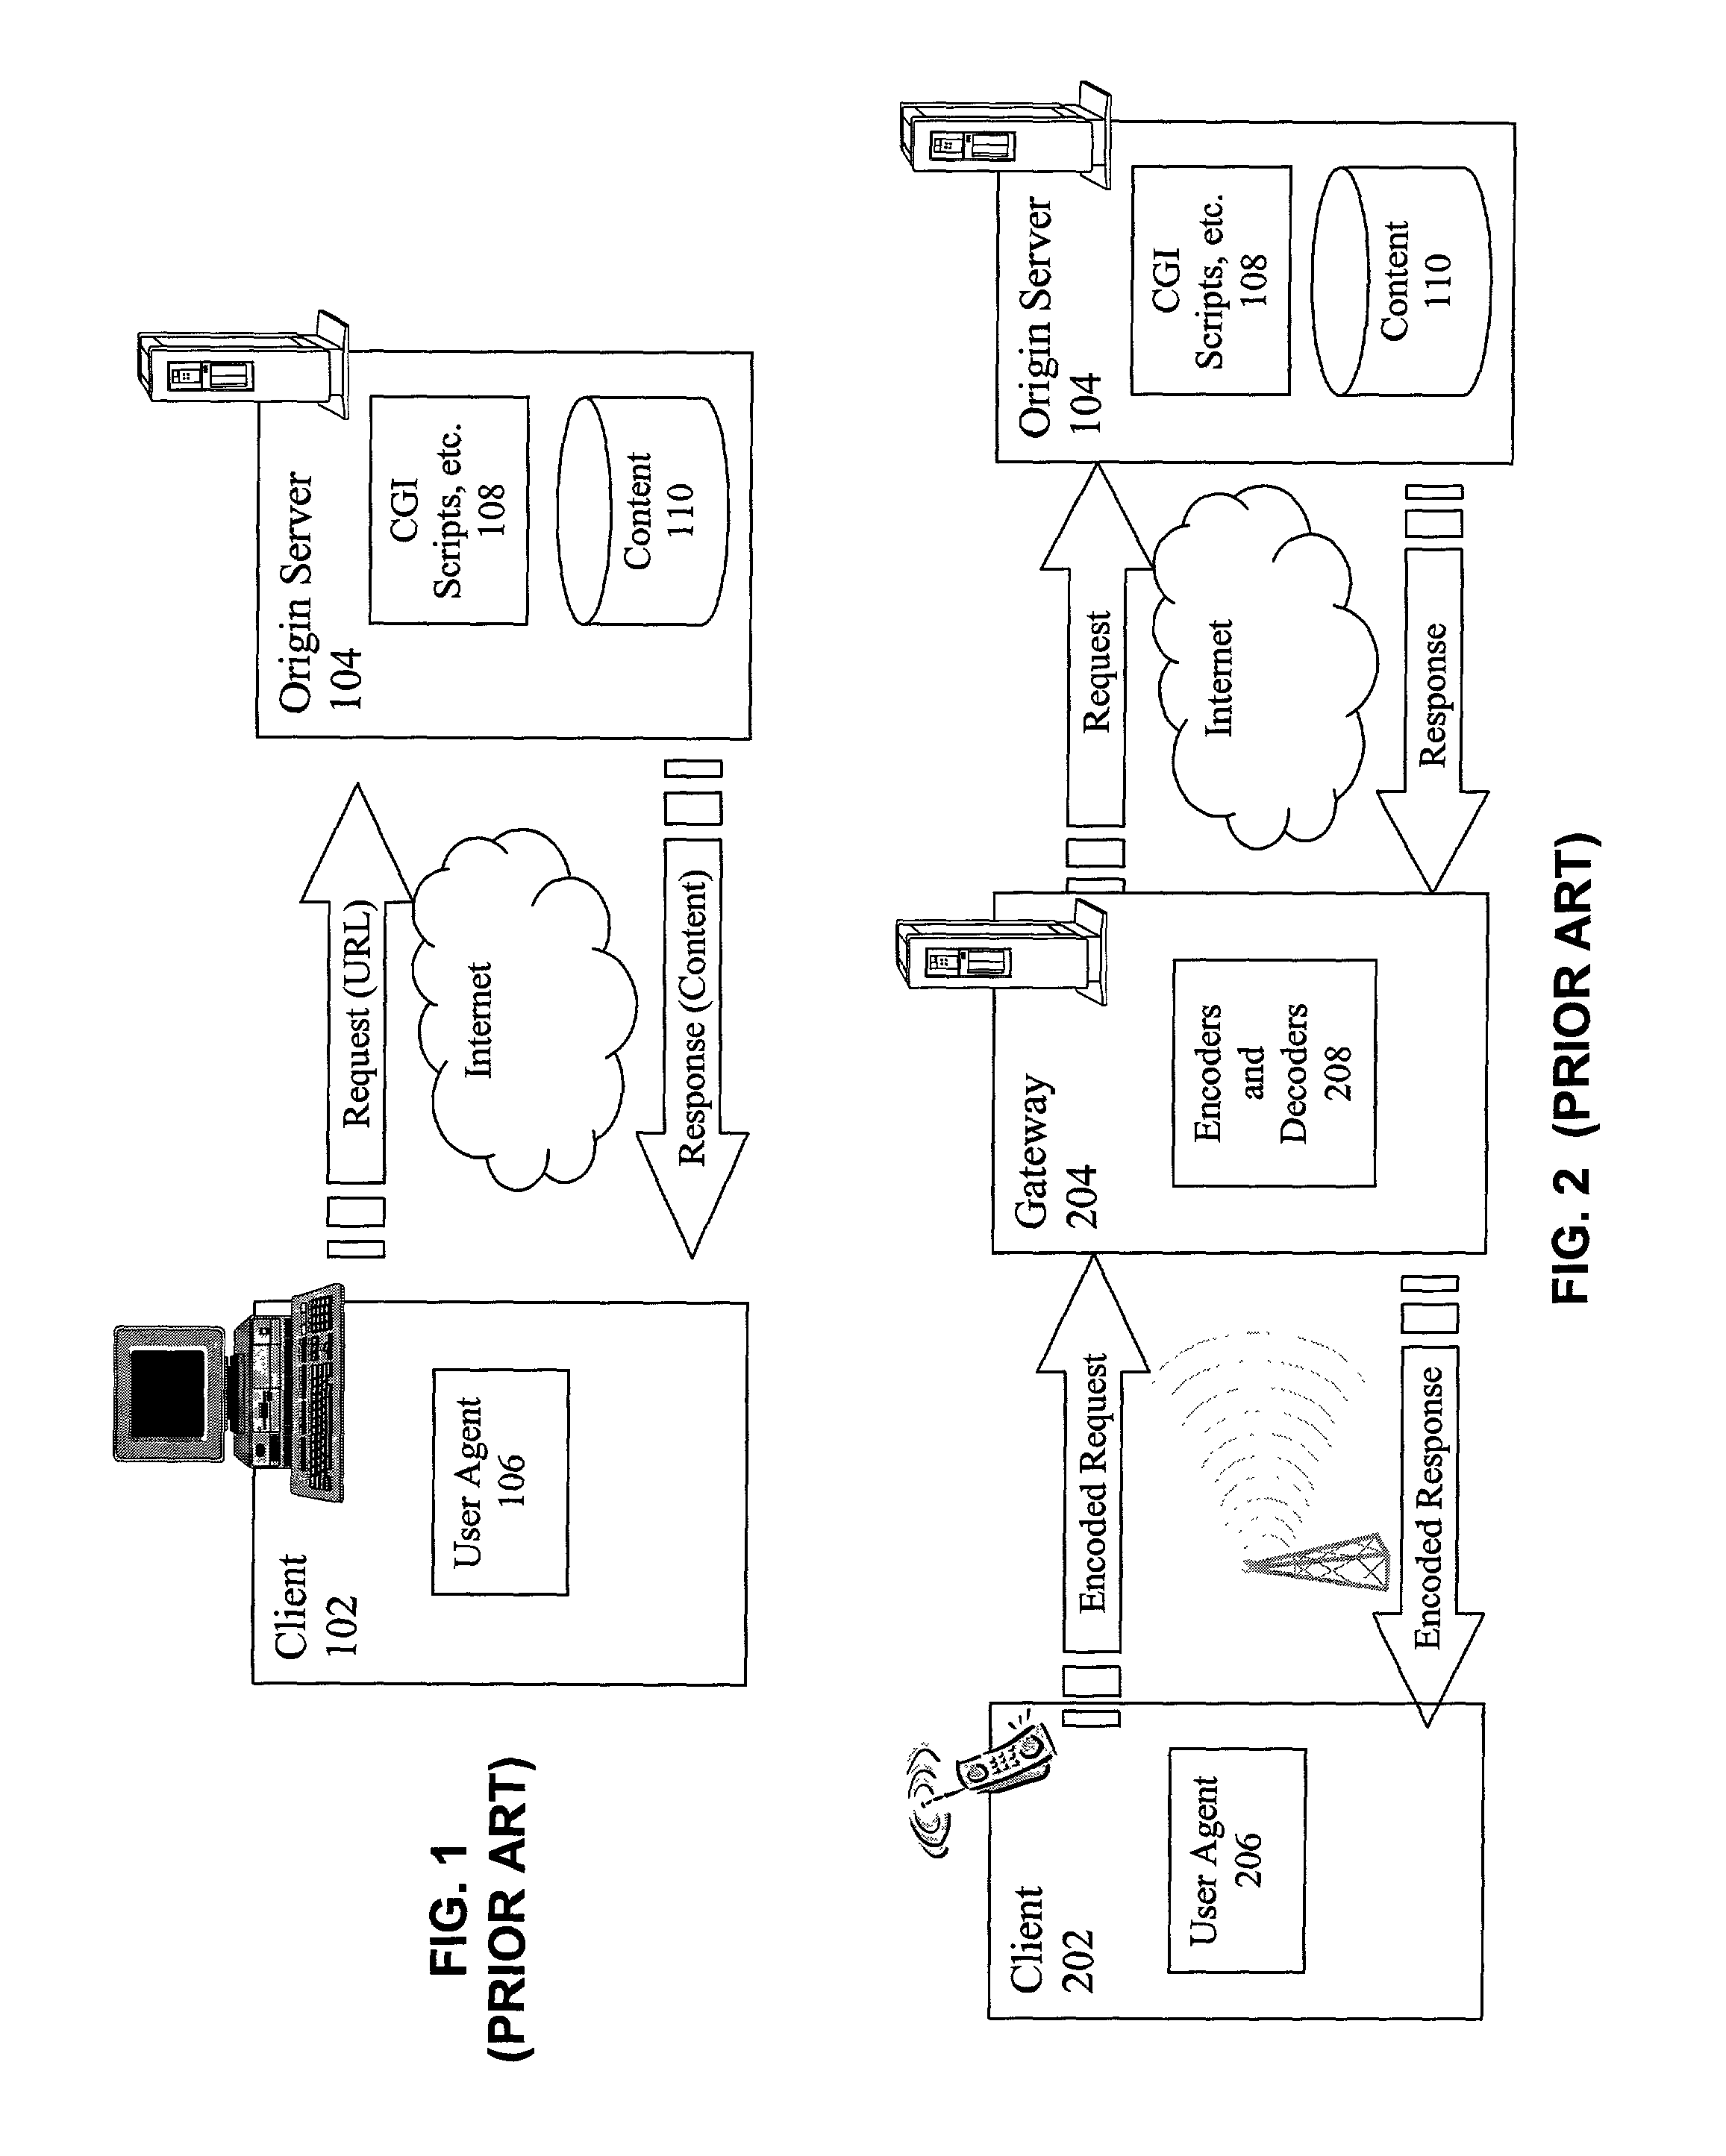 Gateway for processing wireless data content